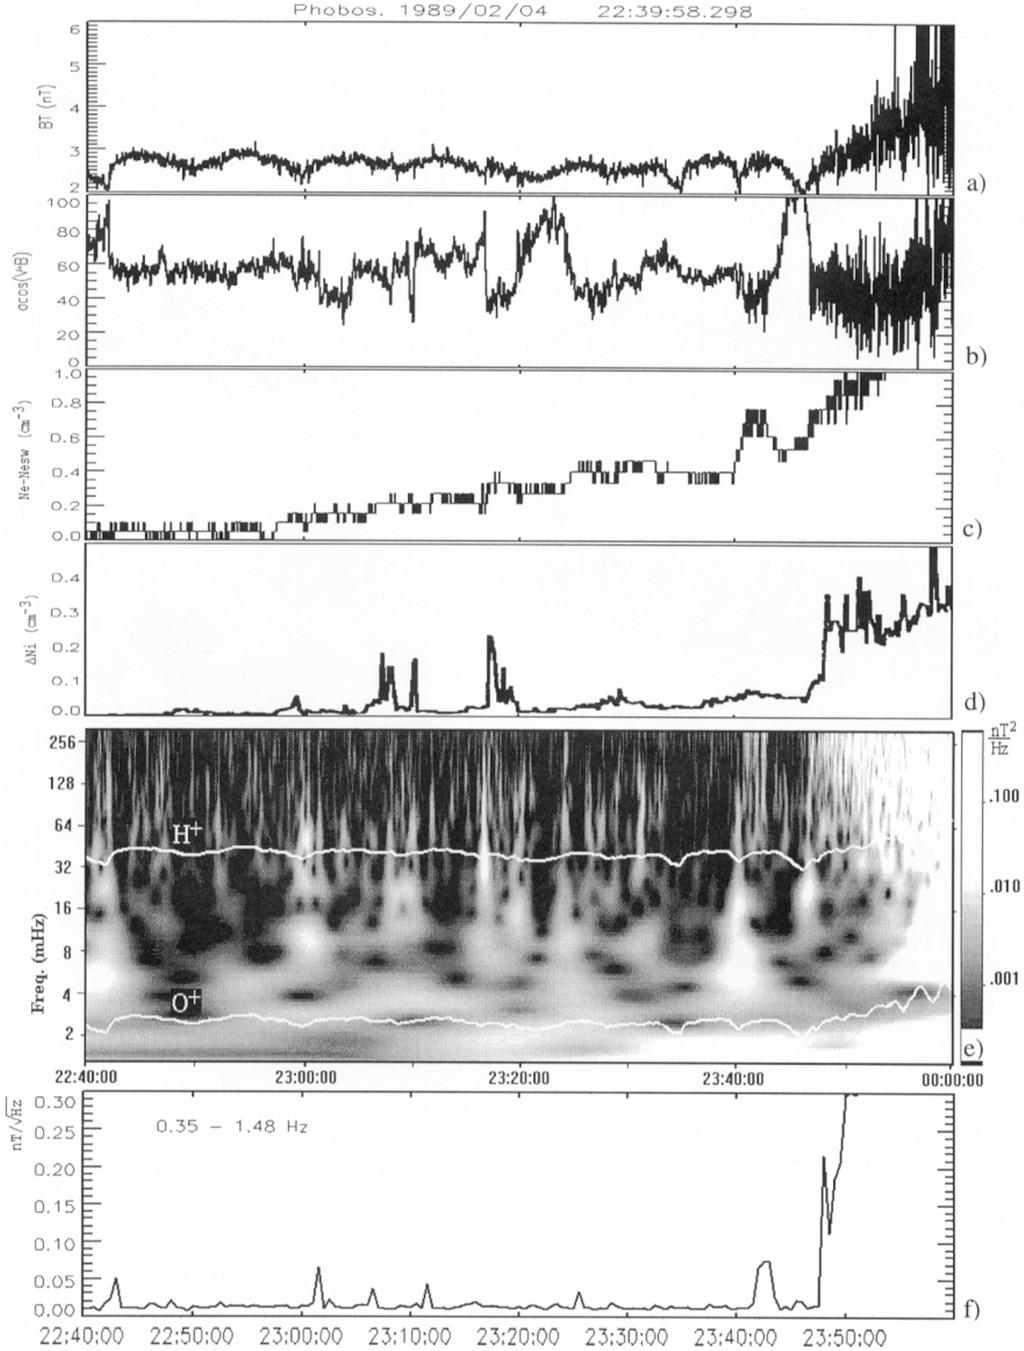 V. TARASOV et al.: WAVELET APPLICATION TO THE MAGNETIC FIELD TURBULENCE 705 Fig. 4. Same as Fig. 3 but for the second elliptic orbit 1989/02/04 05.